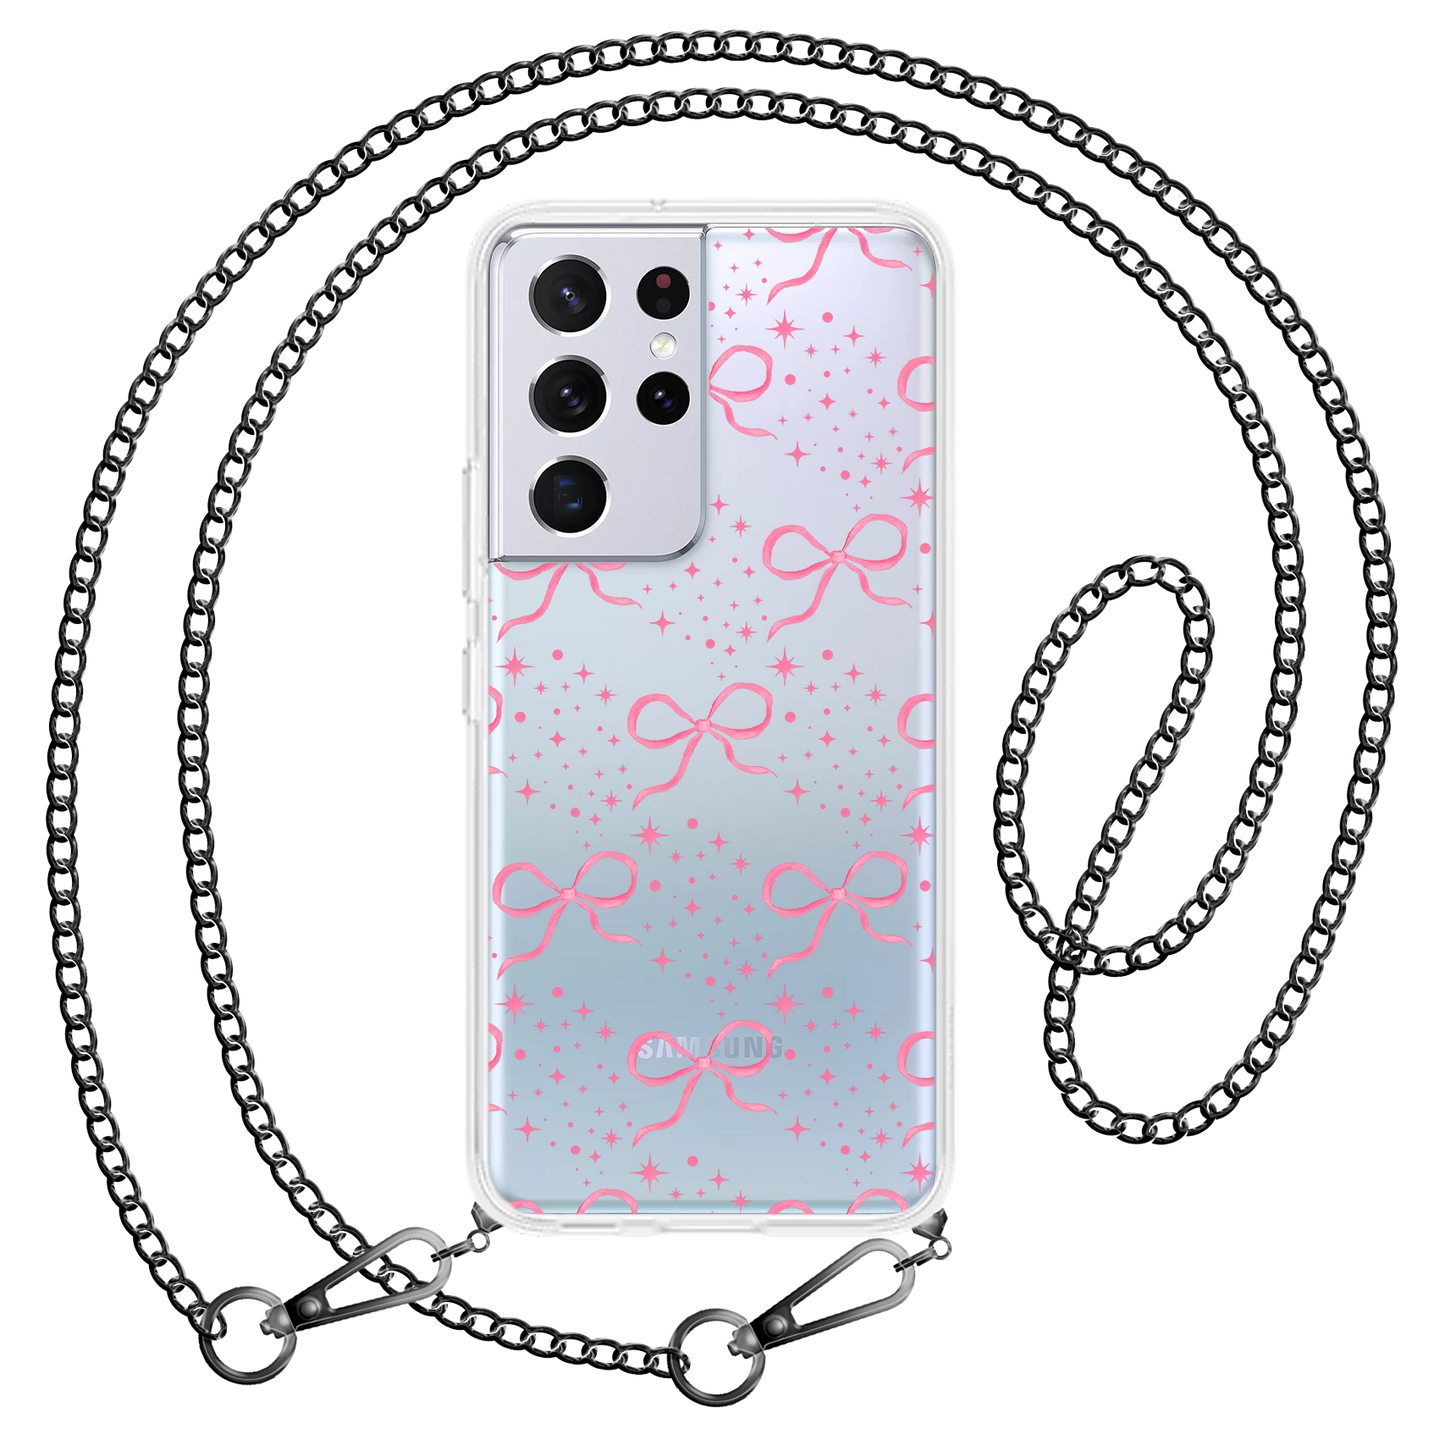 Android Rearguard Hybrid Case - Coquette Glittery Bow